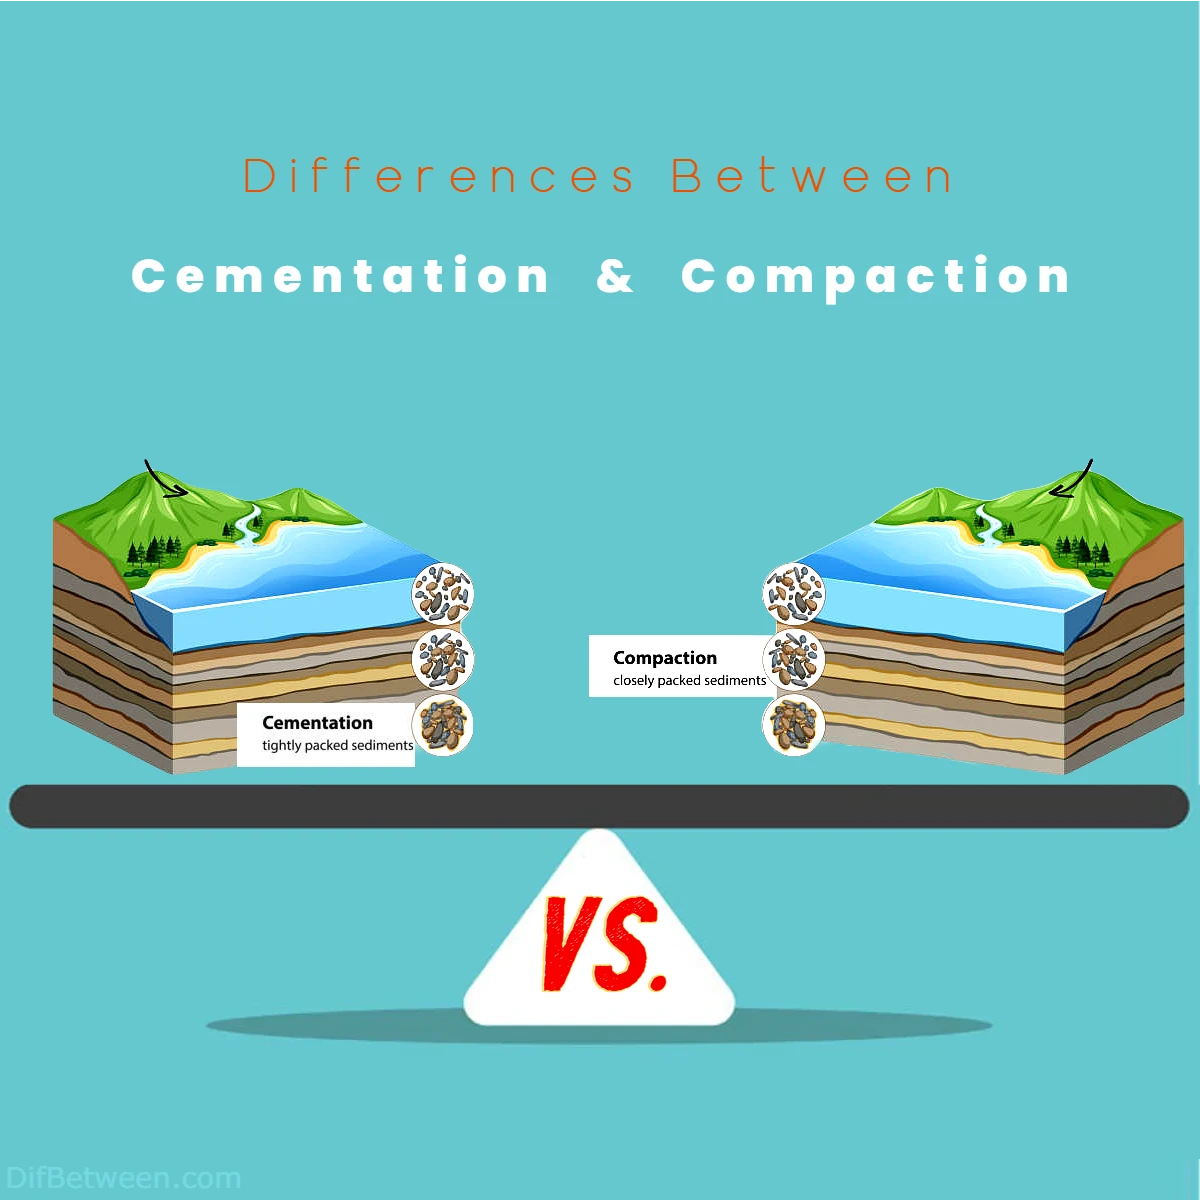 Differences Between Cementation vs Compaction